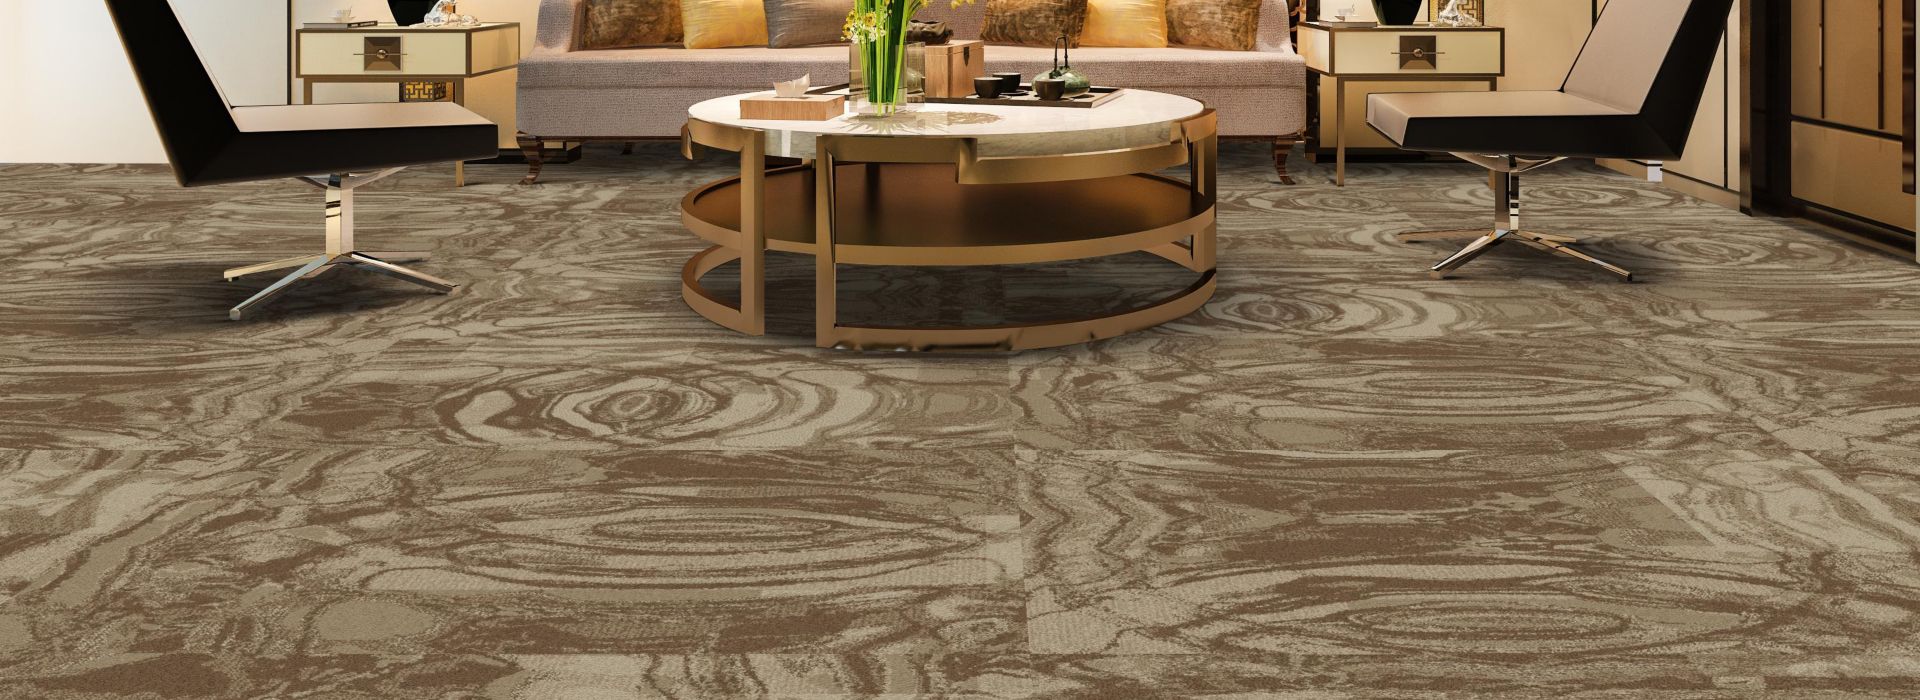 Interface Head Over Heels carpet tile in hospitality guest suite or lobby